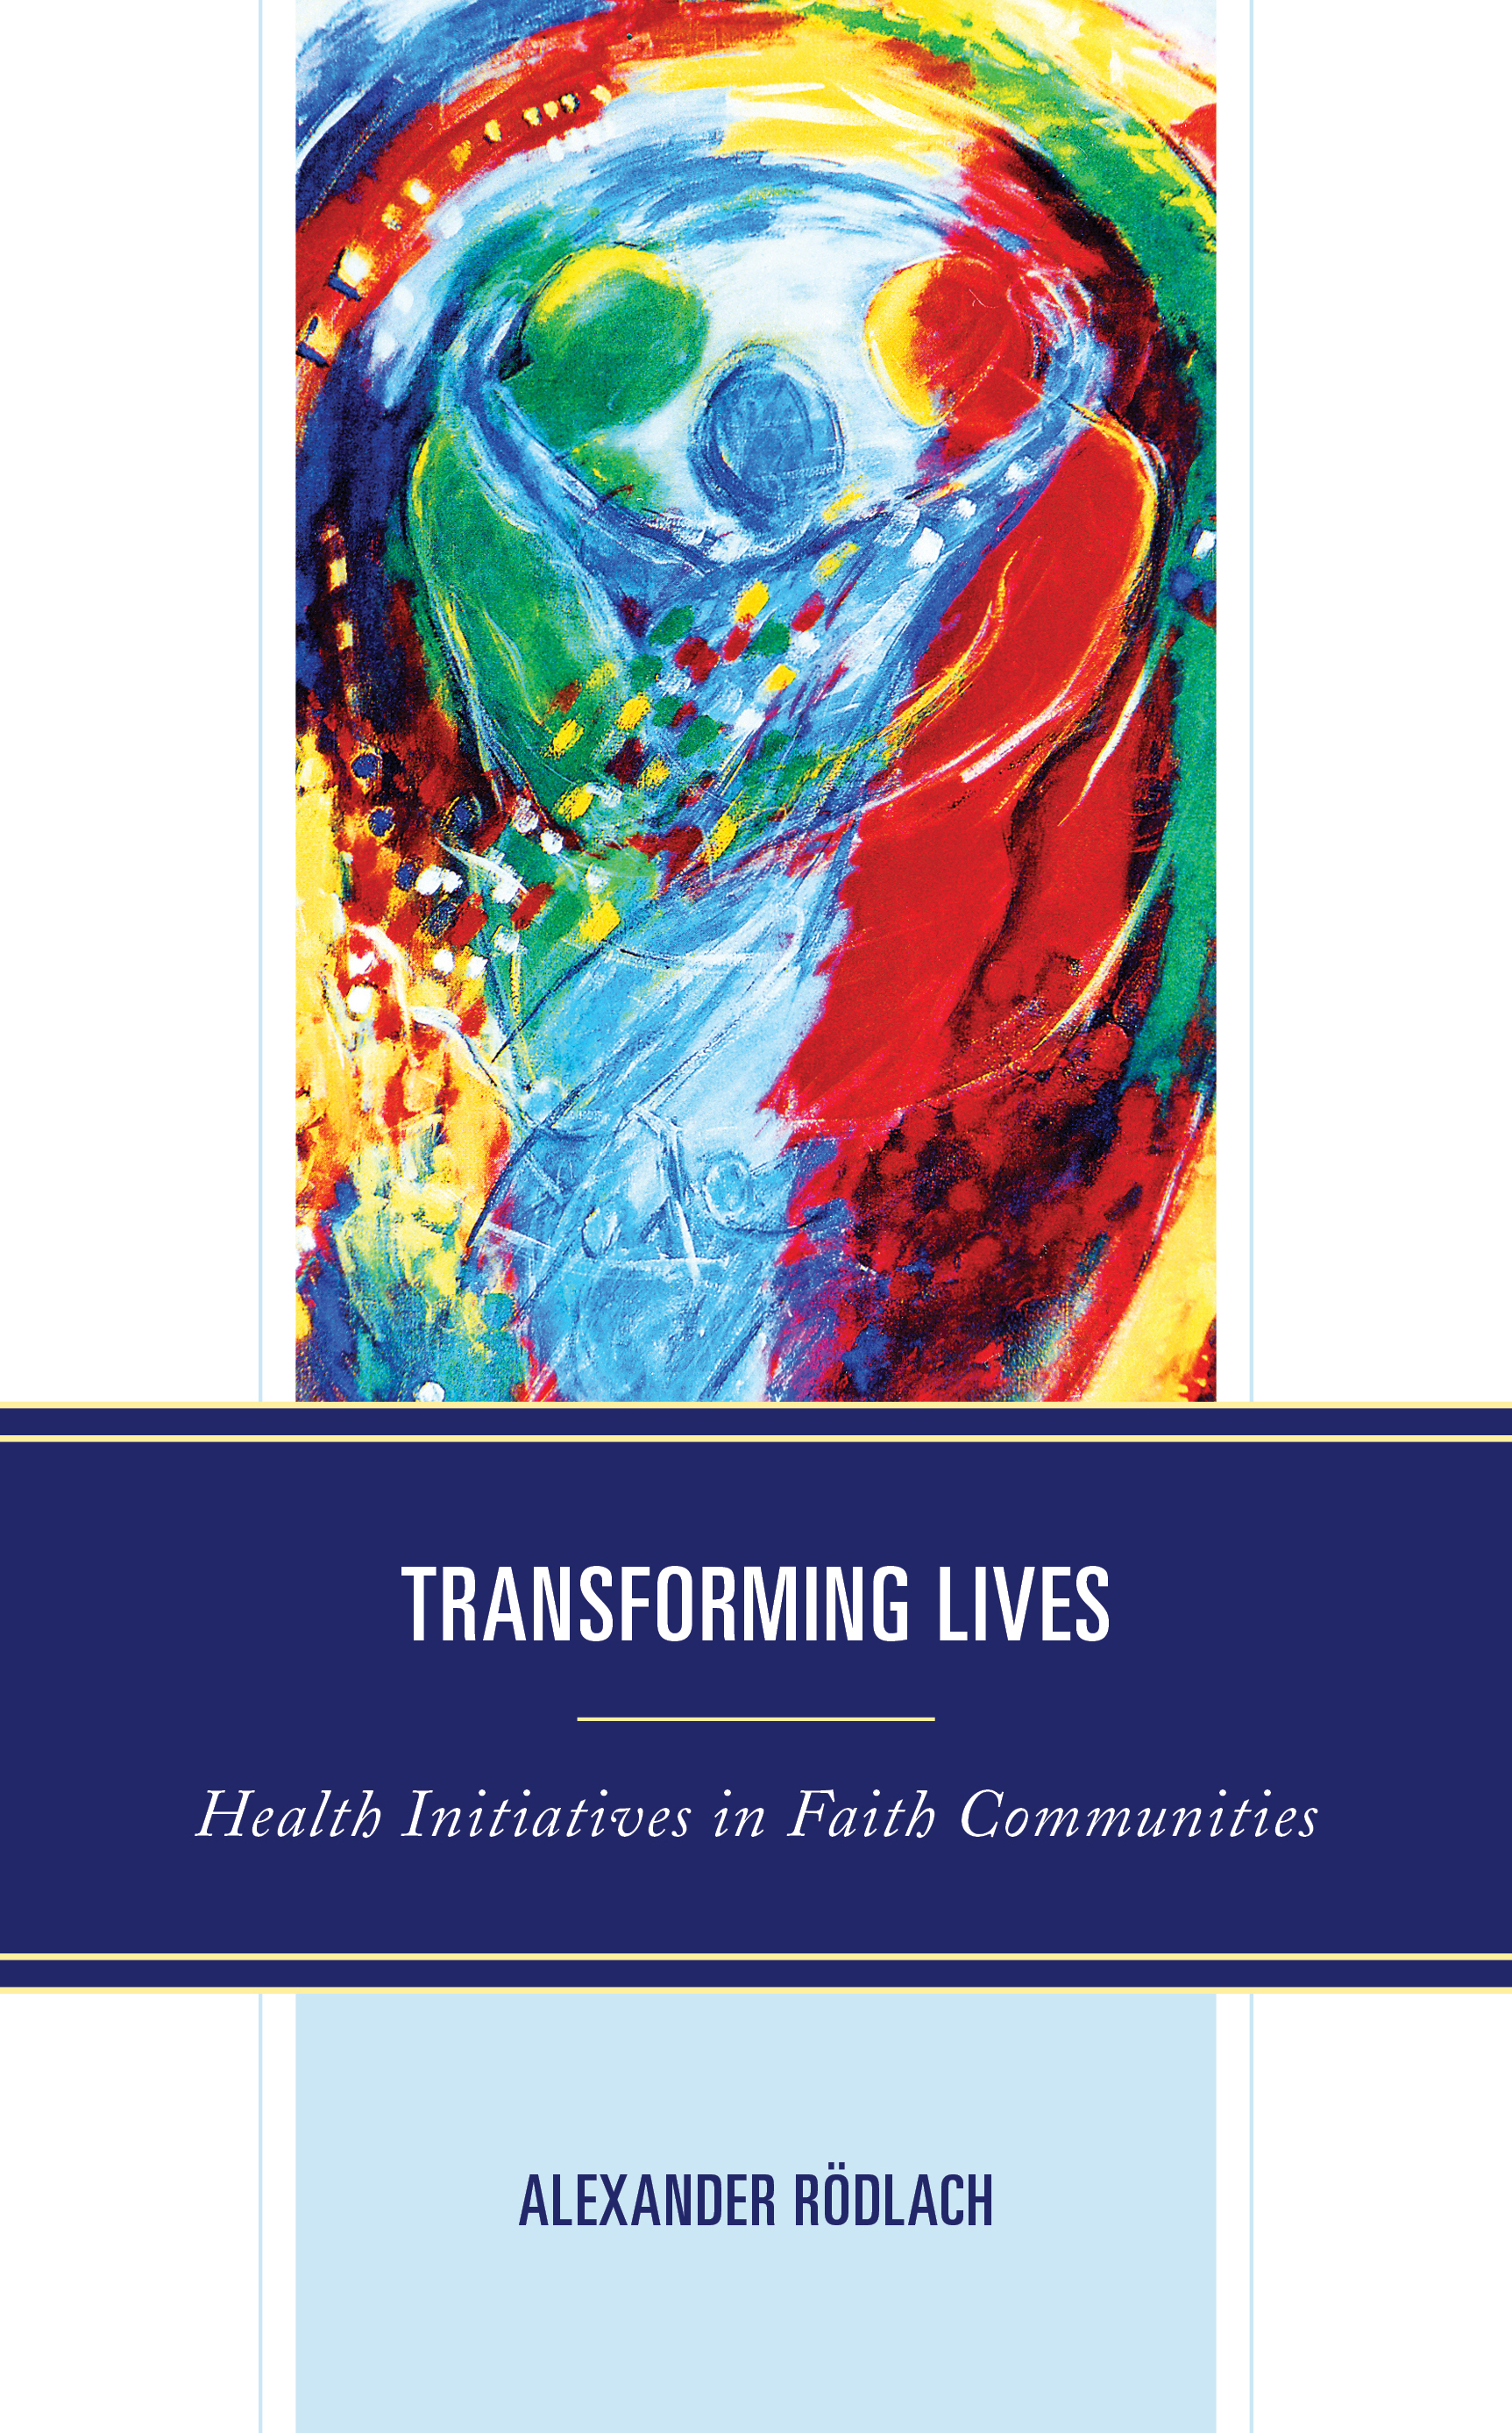 Transforming Lives: Health Initiatives in Faith Communities